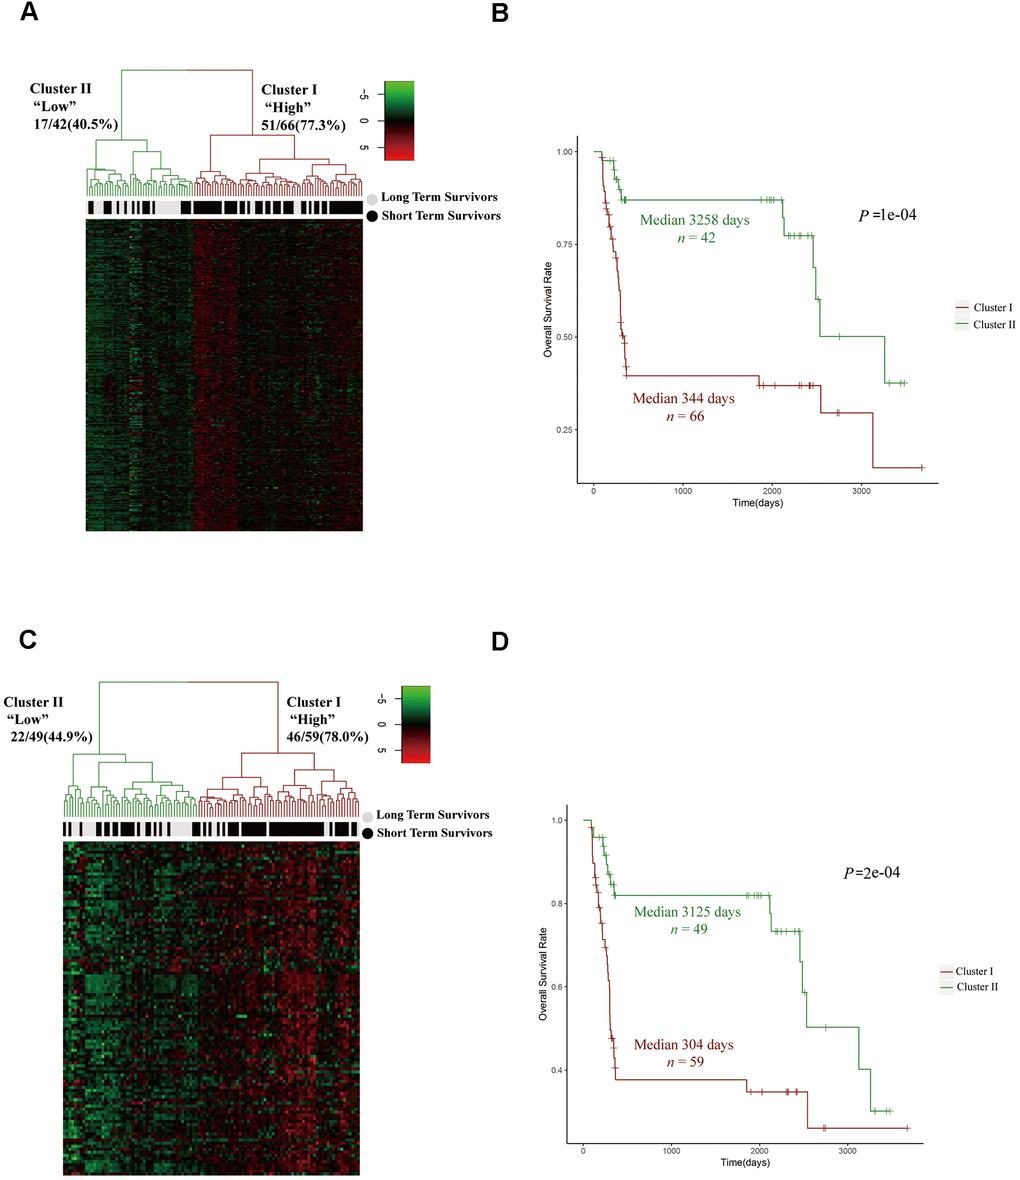 The upregulation of cell cycle pathways was associated with a poor prognosis in HCC patients. (A, C) Unsupervised hierarchical clustering with Euclidean distances and Ward linkages of the expression matrices of 300 mitotic cell cycle genes in Reactome (A) and 108 cell cycle G1/S phase transition genes in the GO resource (C) for 108 tumor samples (68 STS and 40 LTS). Rows indicate the genes and columns indicate the patients. The patient survival status for each tumor is depicted directly above each column. Cluster I expressed higher levels of the genes in these two pathways, while cluster II expressed lower levels. (B) Kaplan-Meier curves for the clusters resulting from the unsupervised hierarchical clustering in (A). (D) Kaplan-Meier curves for the clusters resulting from the unsupervised hierarchical clustering in (C).